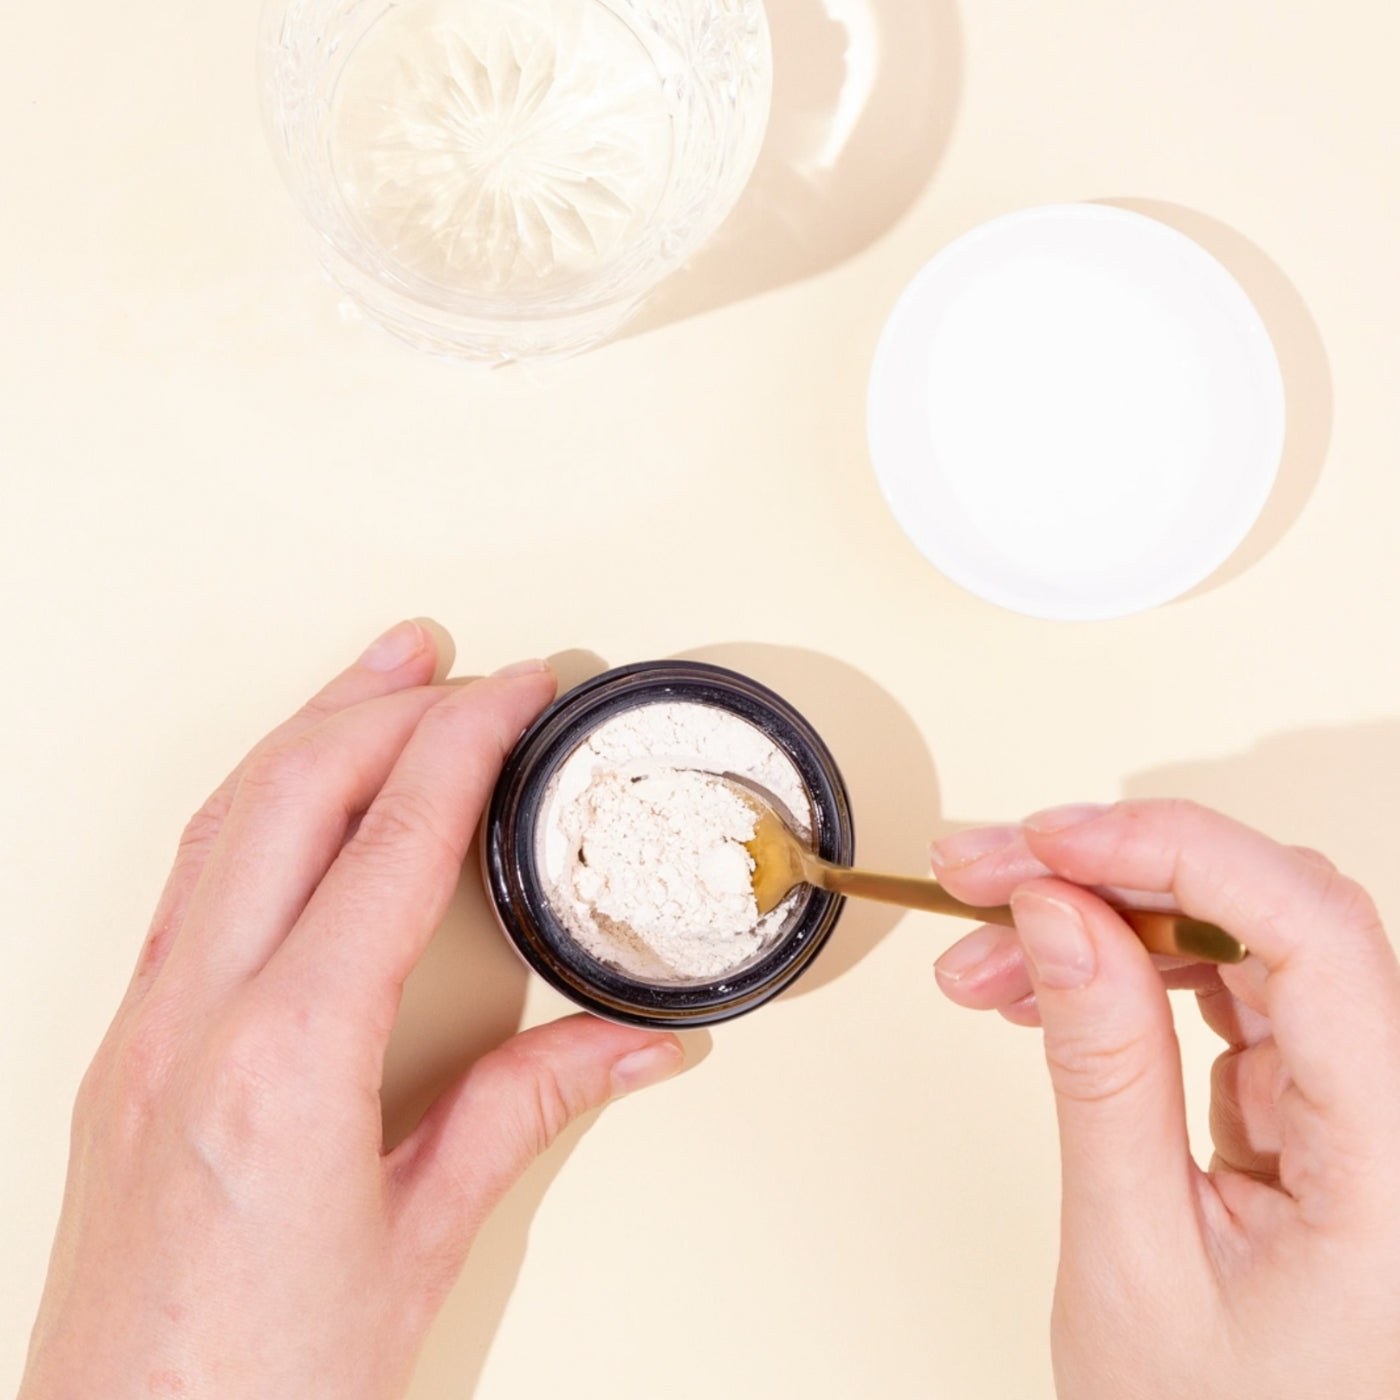 Why our exfoliants and masks are in dry powder form